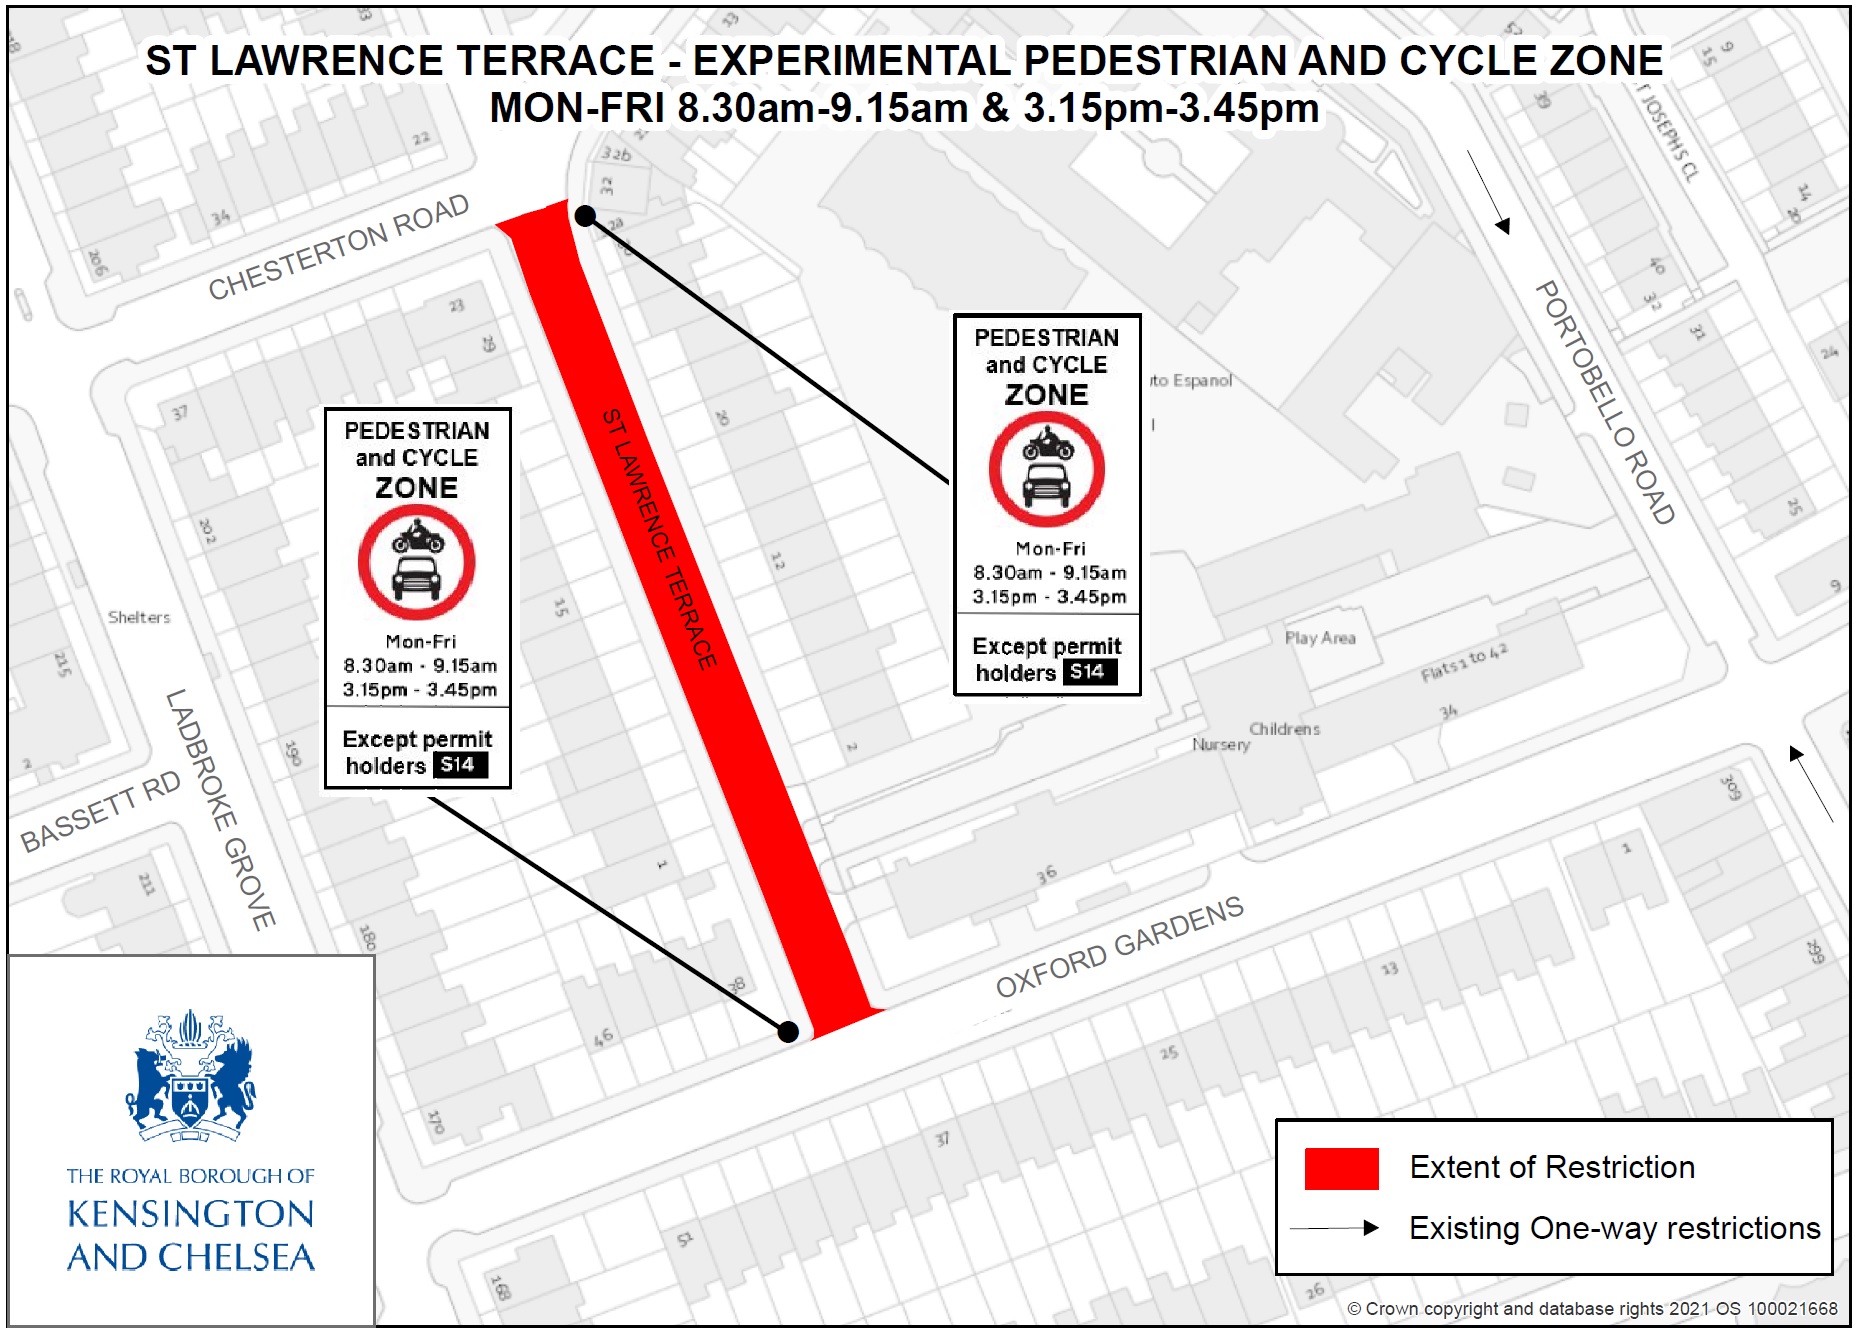 A map of the proposed closure area on St Lawrence Terrace (between the junctions of Chesterton Road and Oxford Gardens). The area would become a pedestrian and cycle zone (plus exempt vehicles) during school term between 8.30 to 9.15am and 3.15 to 3.45pm Monday to Friday.